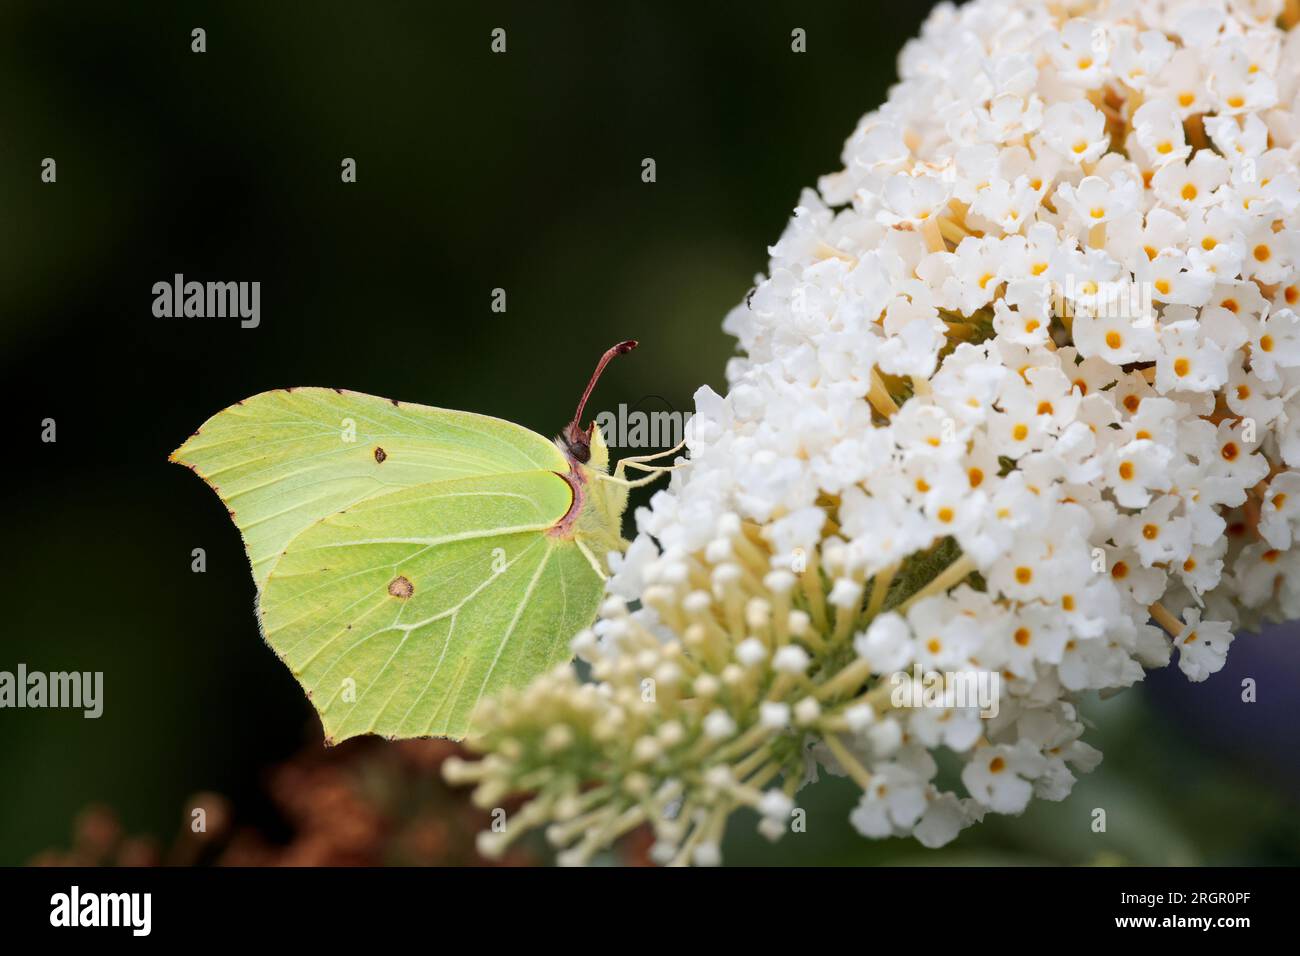 Brimstone butterfly Gonepteryx rhamni, feeding on white buddleia with unique leaf shaped wings greenish yellow with raised veins, male brighter colour Stock Photo